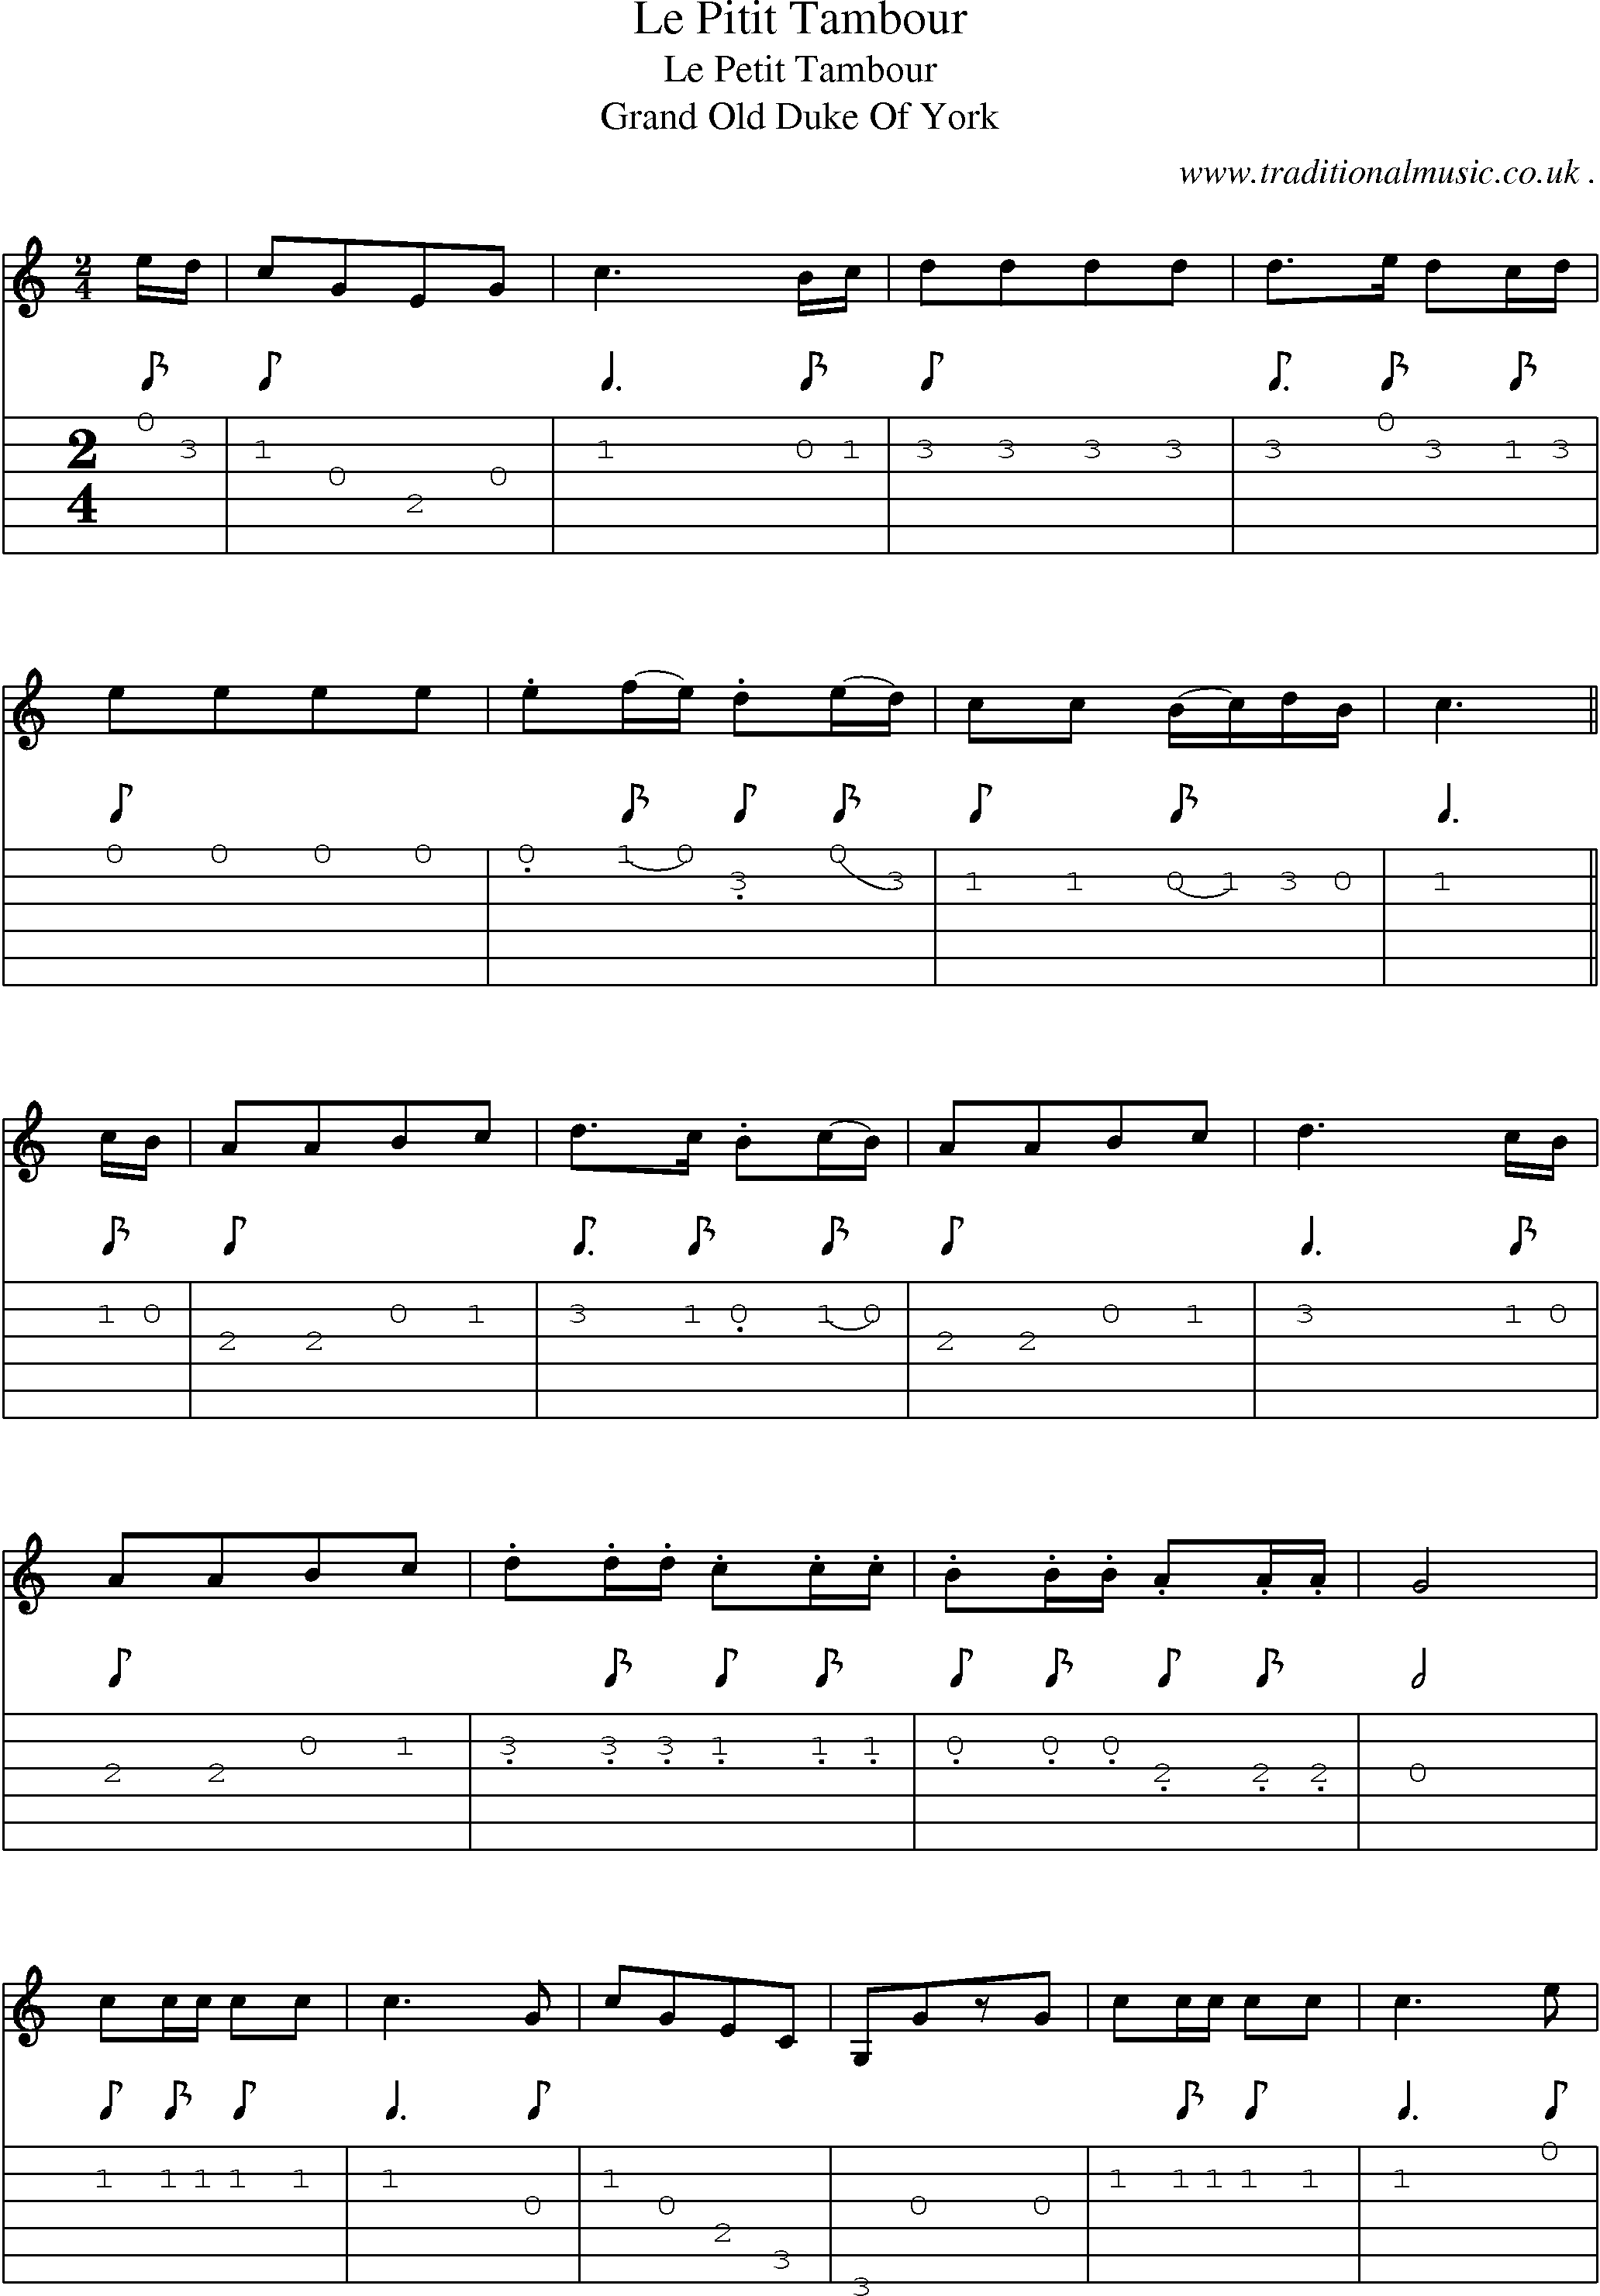 Sheet-Music and Guitar Tabs for Le Pitit Tambour